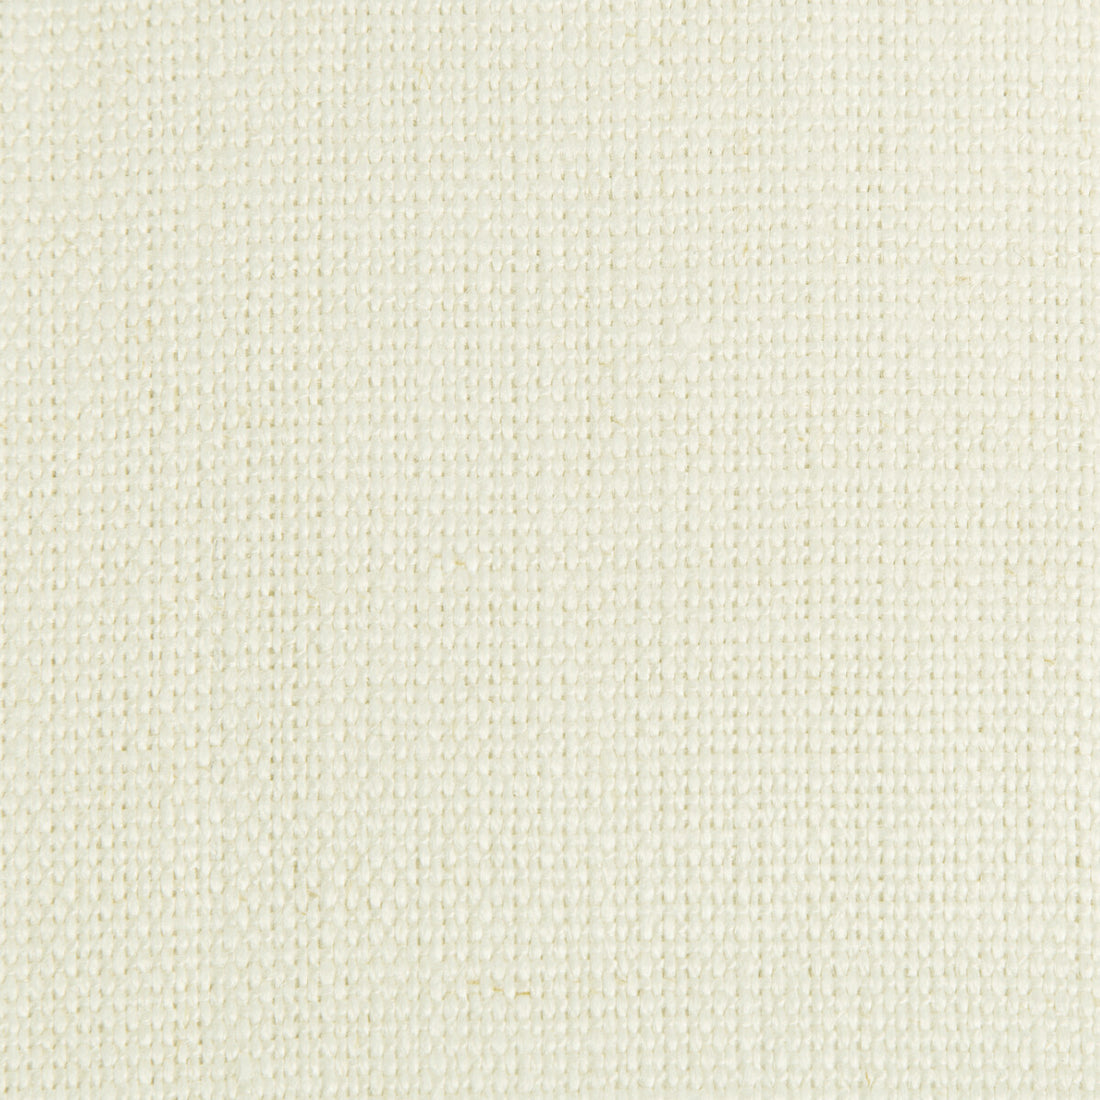 Buckley fabric in ivory color - pattern 30983.111.0 - by Kravet Design in the Thom Filicia collection